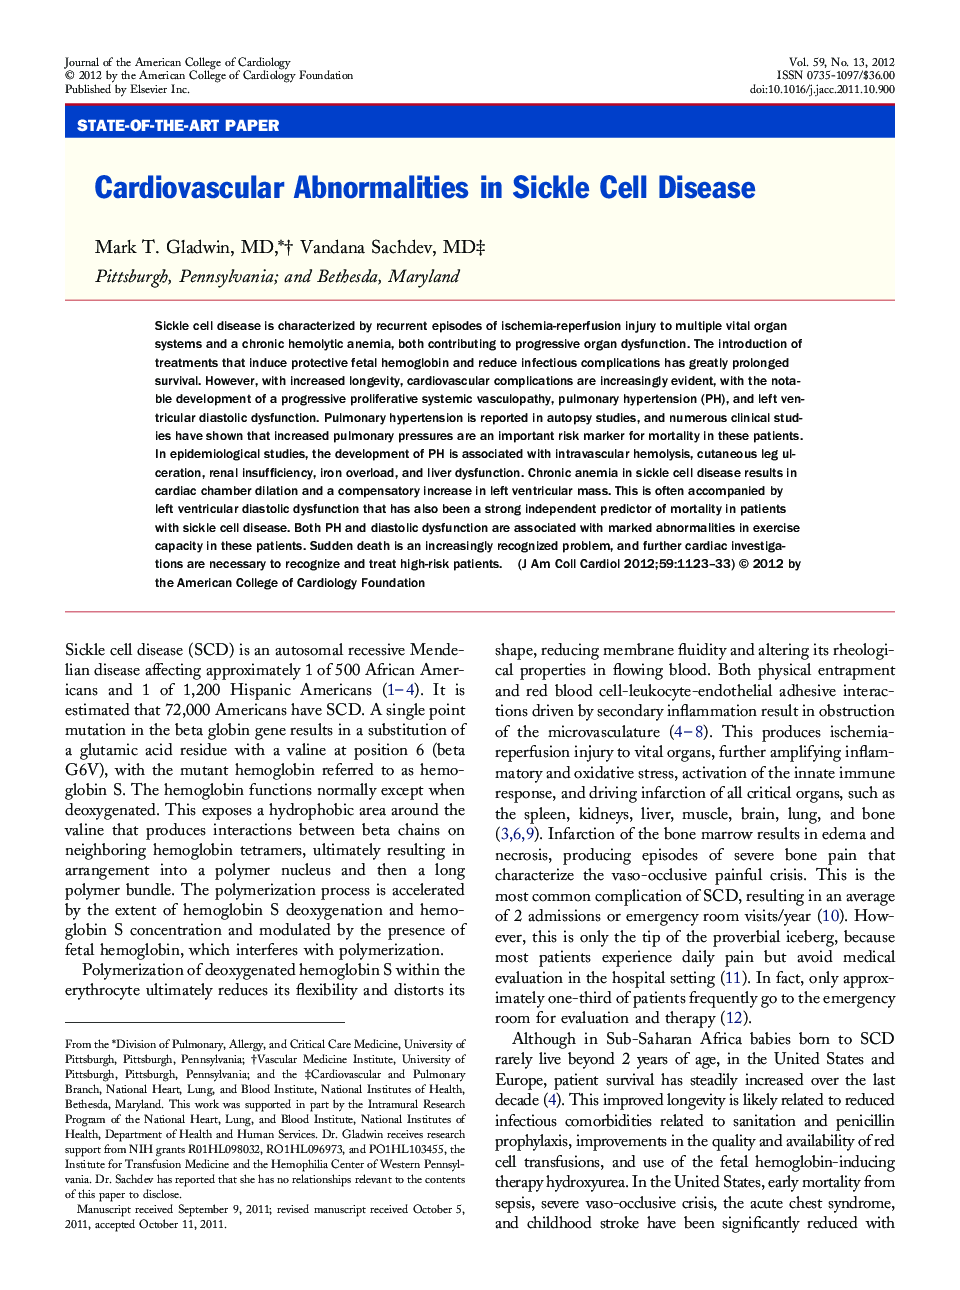 Cardiovascular Abnormalities in Sickle Cell Disease 